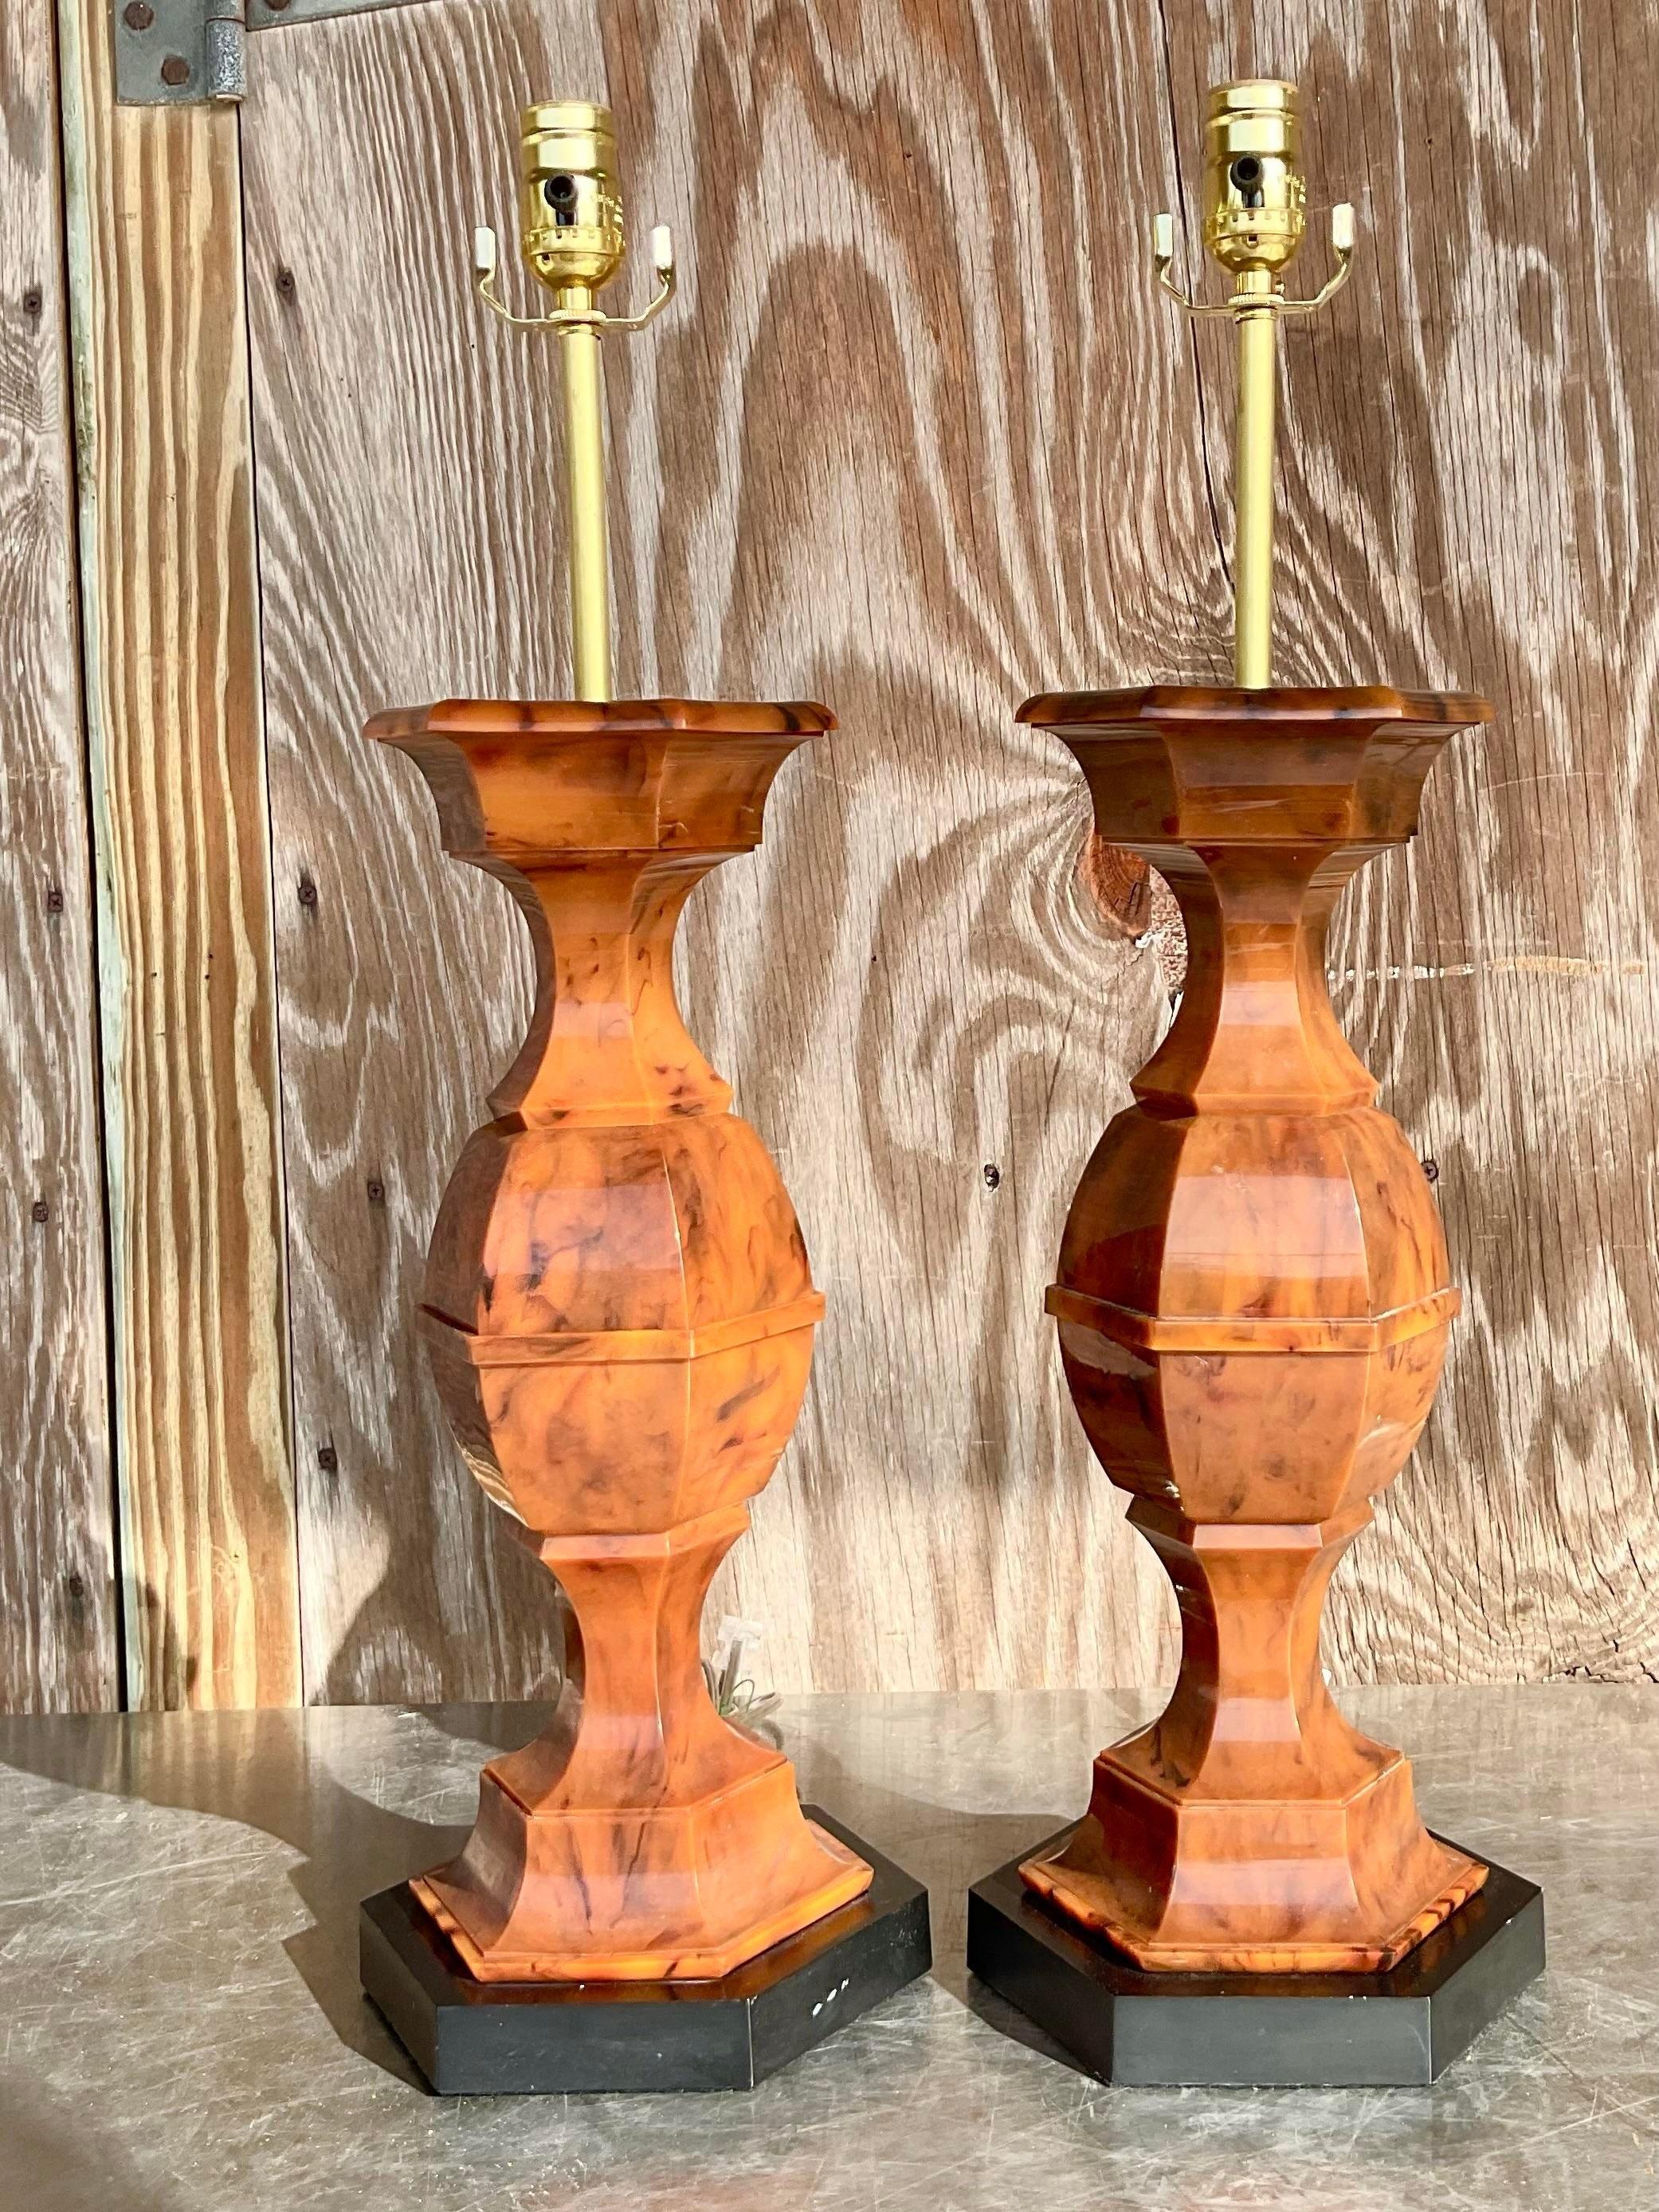 Epic pair of vintage Bakelite stack style hourglass shaped table lamps. Fun period addition to any sideboard or credenza to immediately marry the worlds of old and new. Acquired from a Palm Beach estate